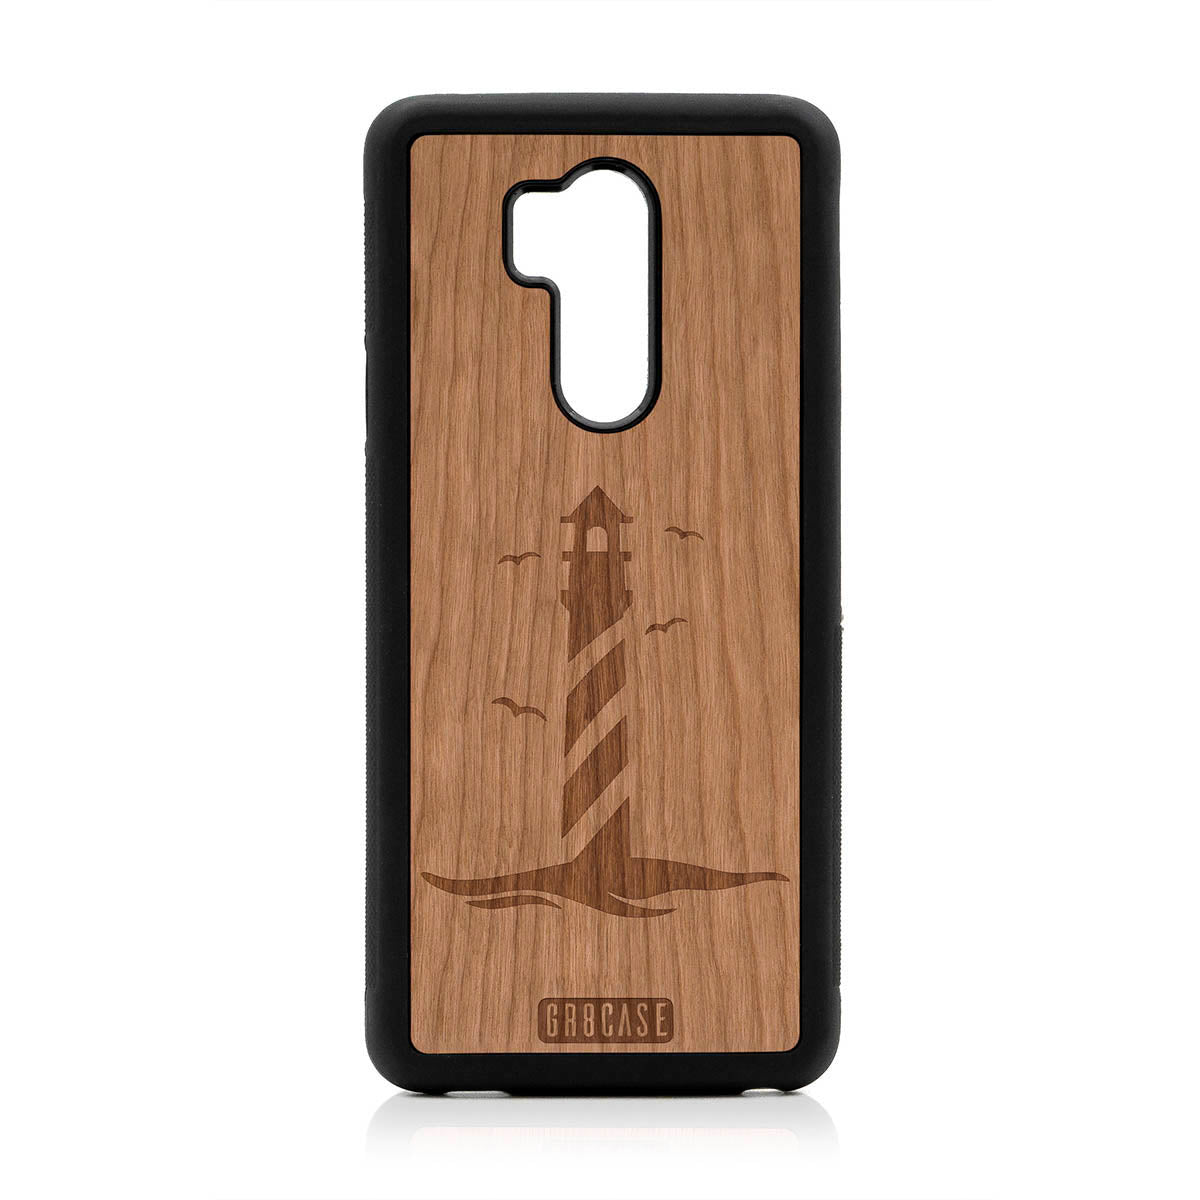 Lighthouse Design Wood Case For LG G7 ThinQ